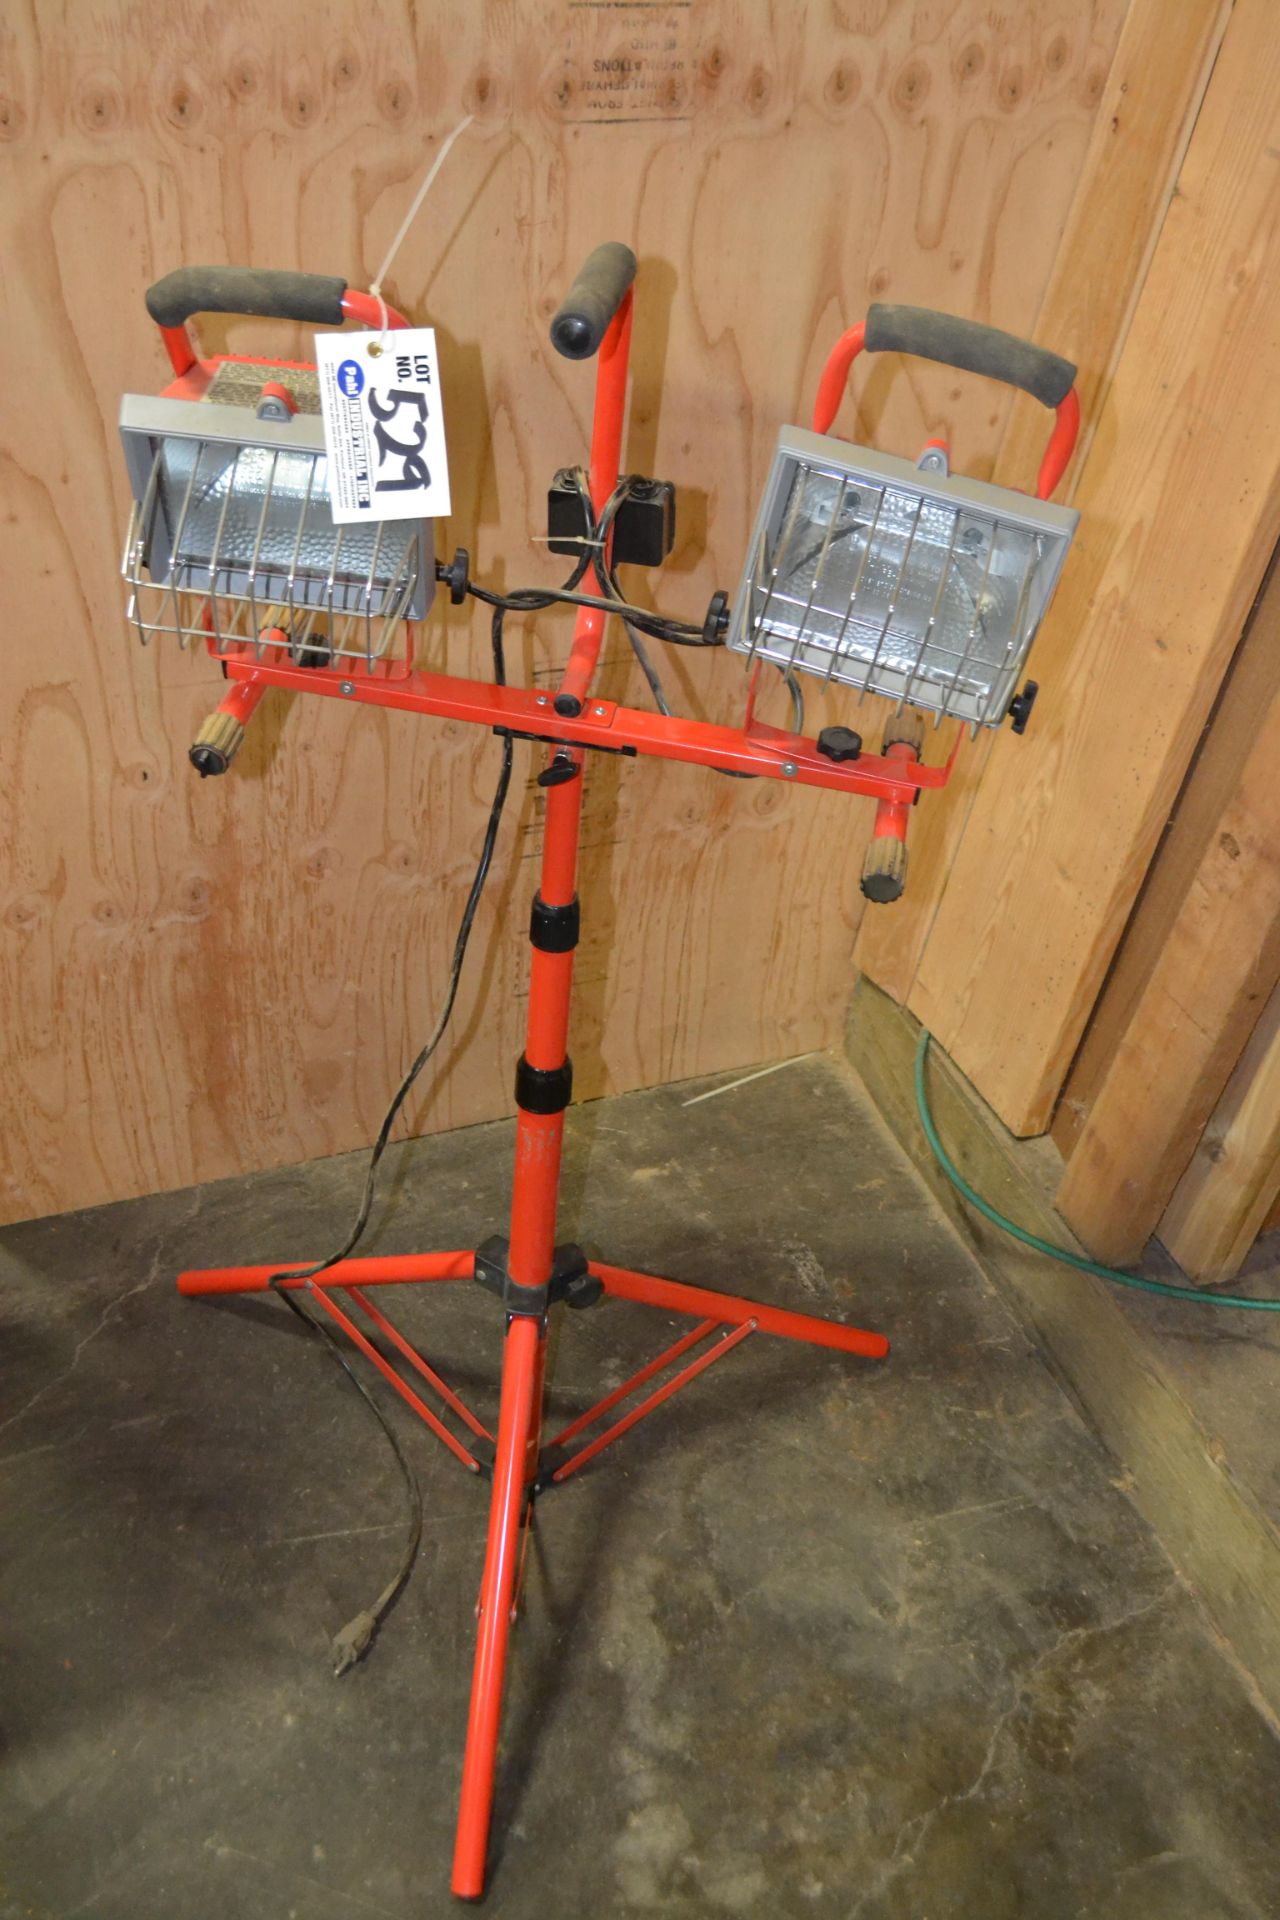 Dual 500W Shop Lights on stand